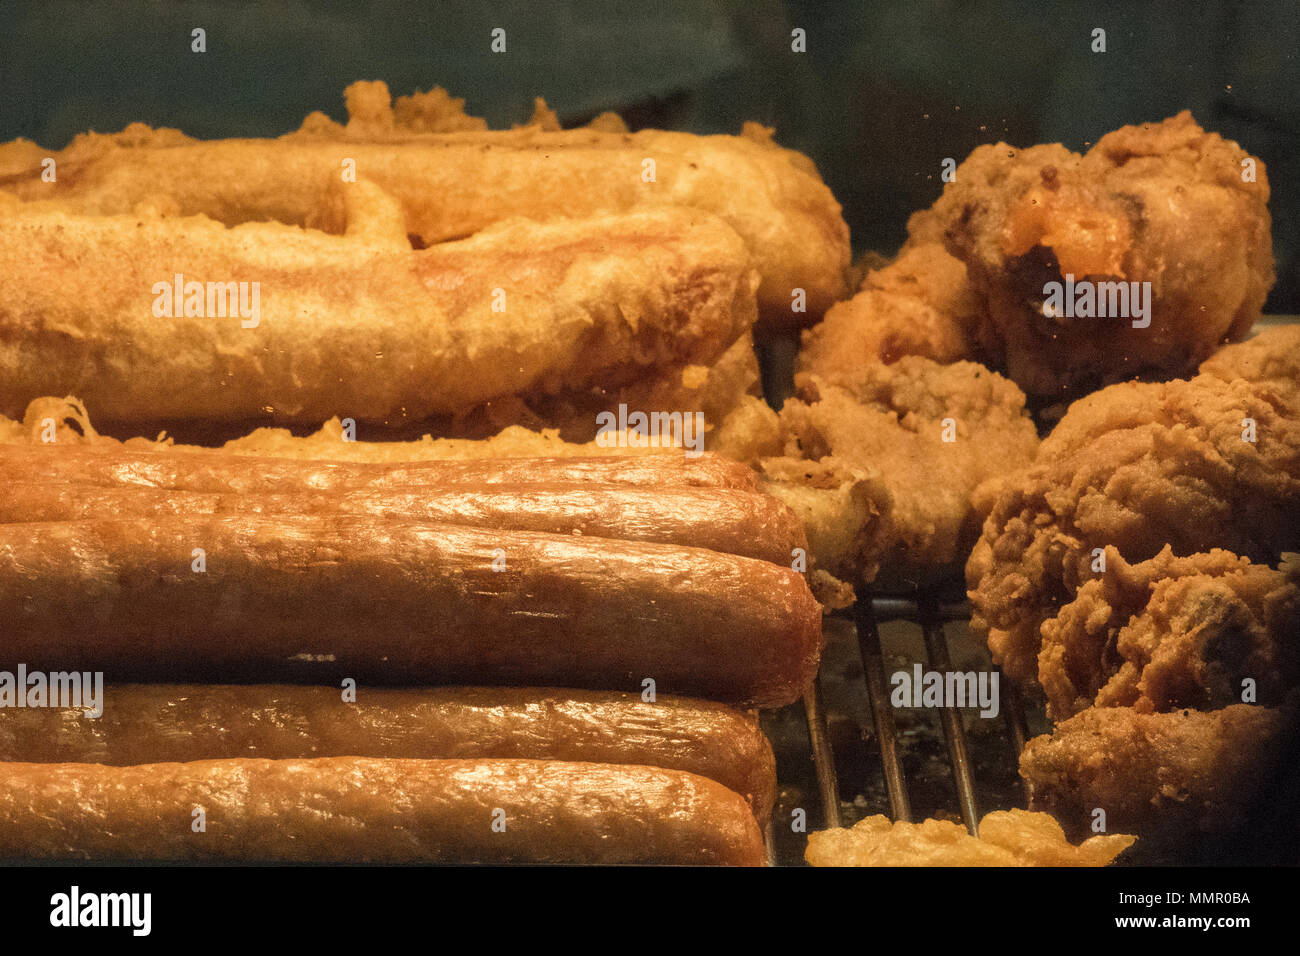 fried foods in heated counter display. Stock Photo